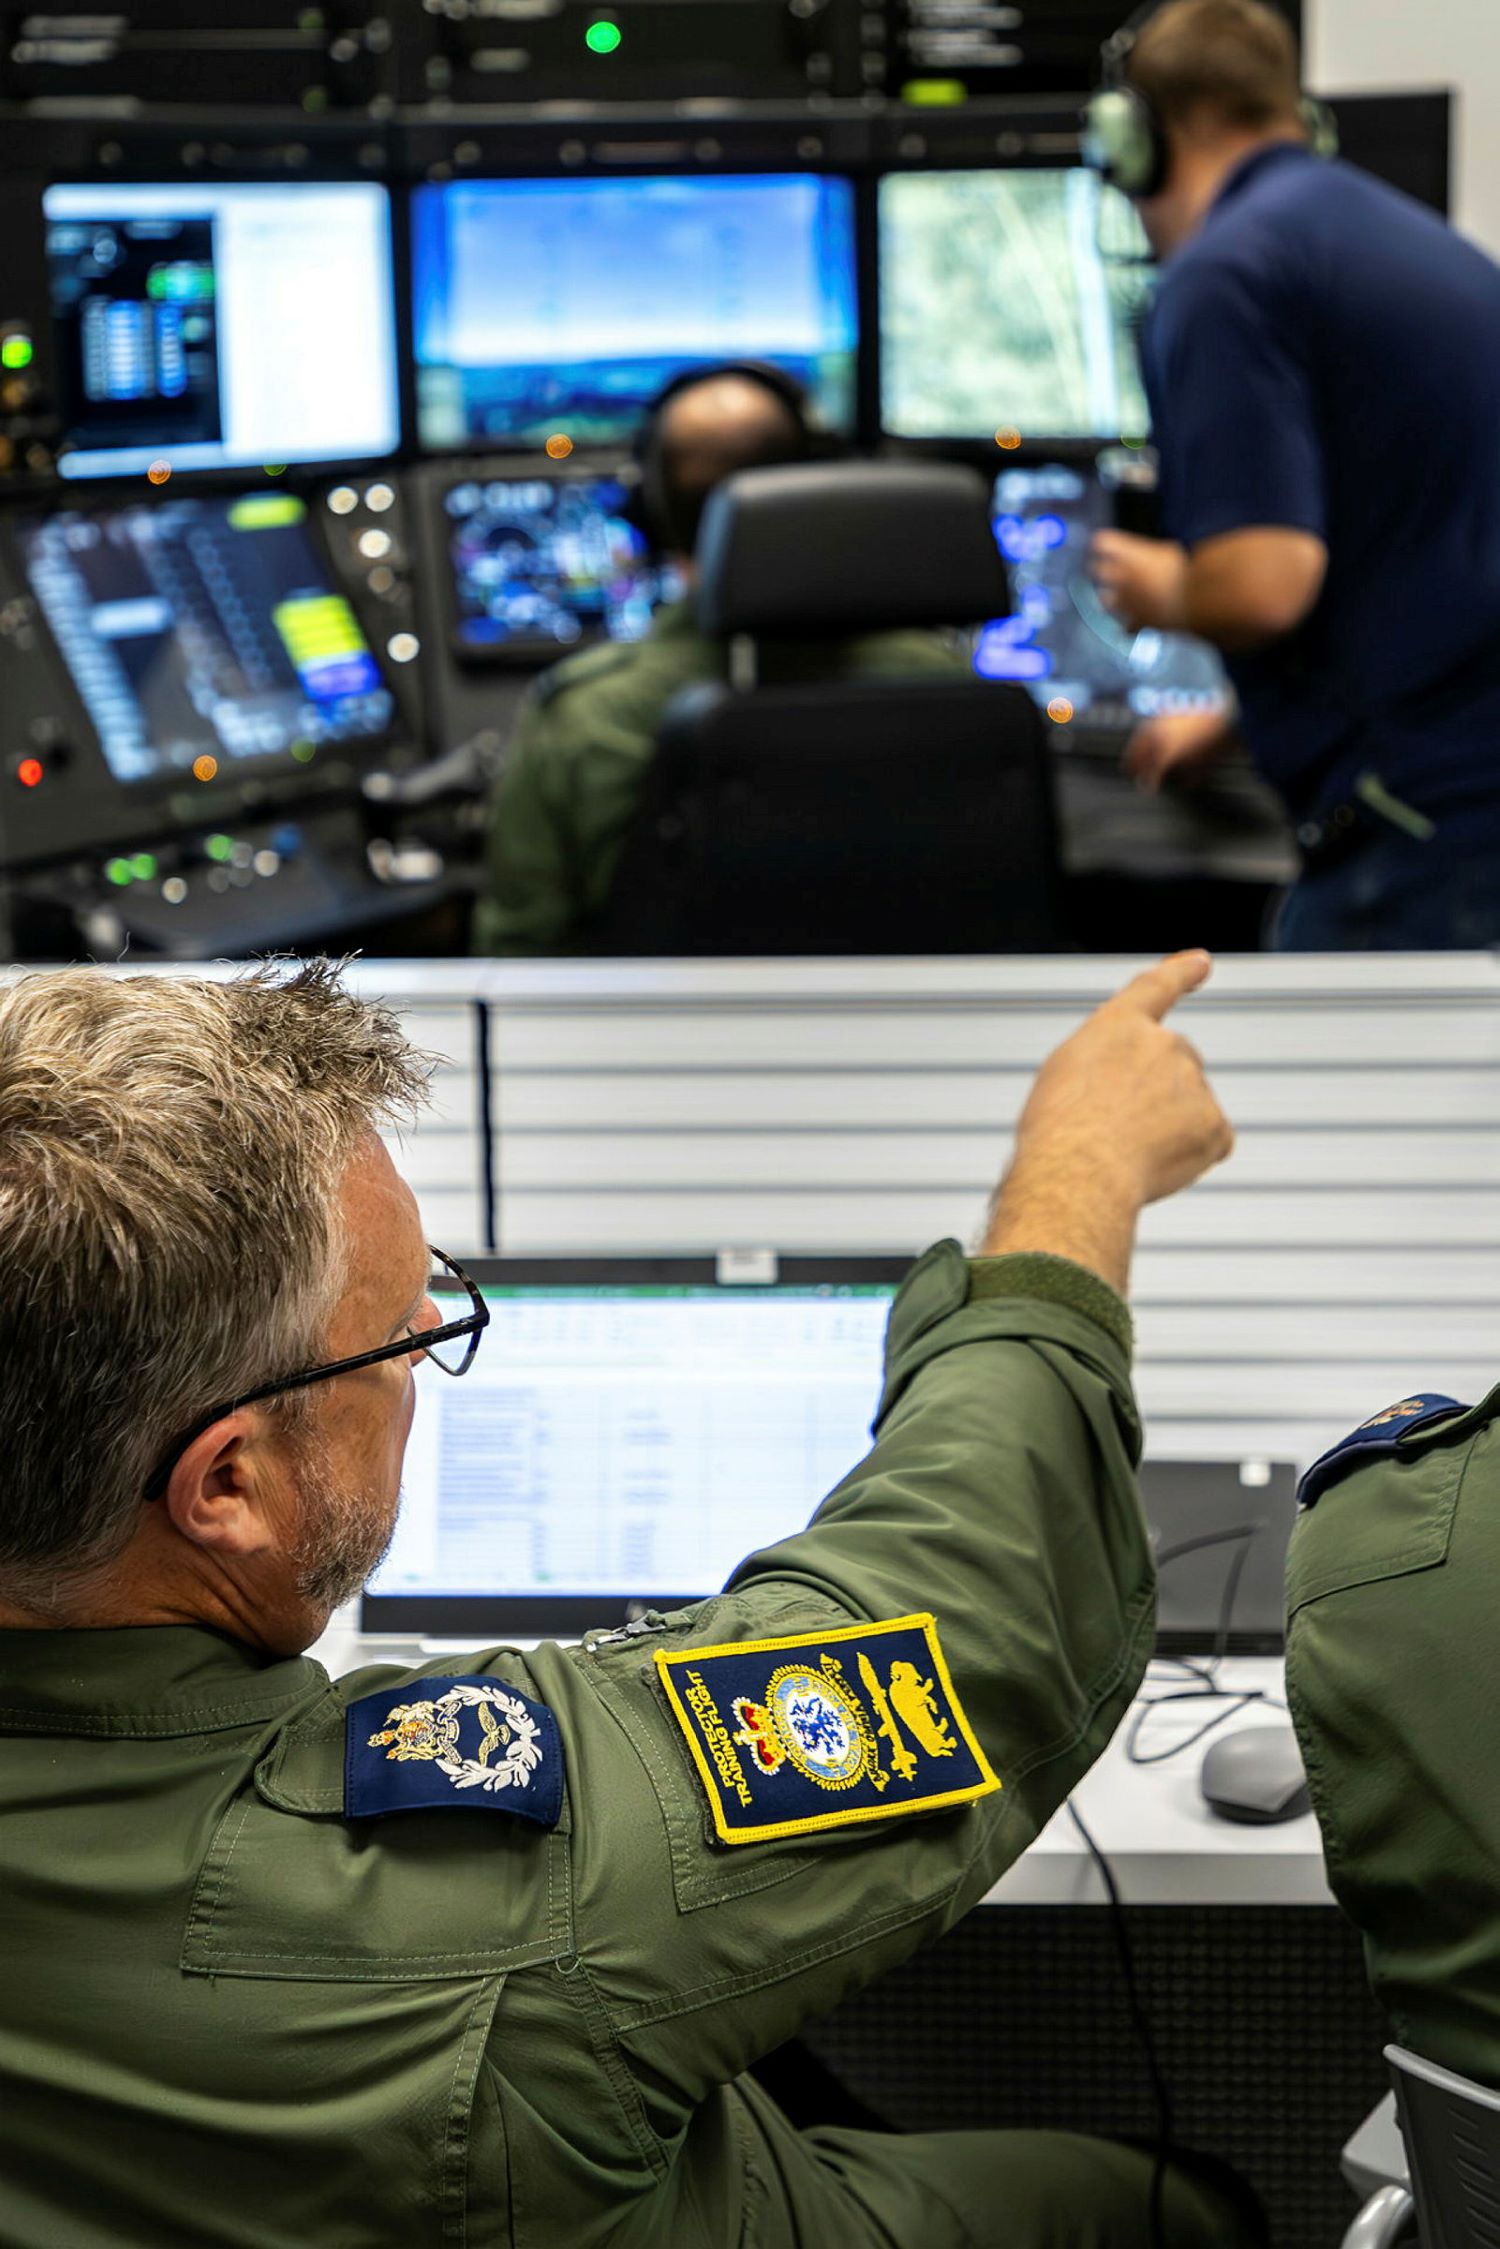 RAF personnel in training room, personnel pointing in the foreground and screens in the background.